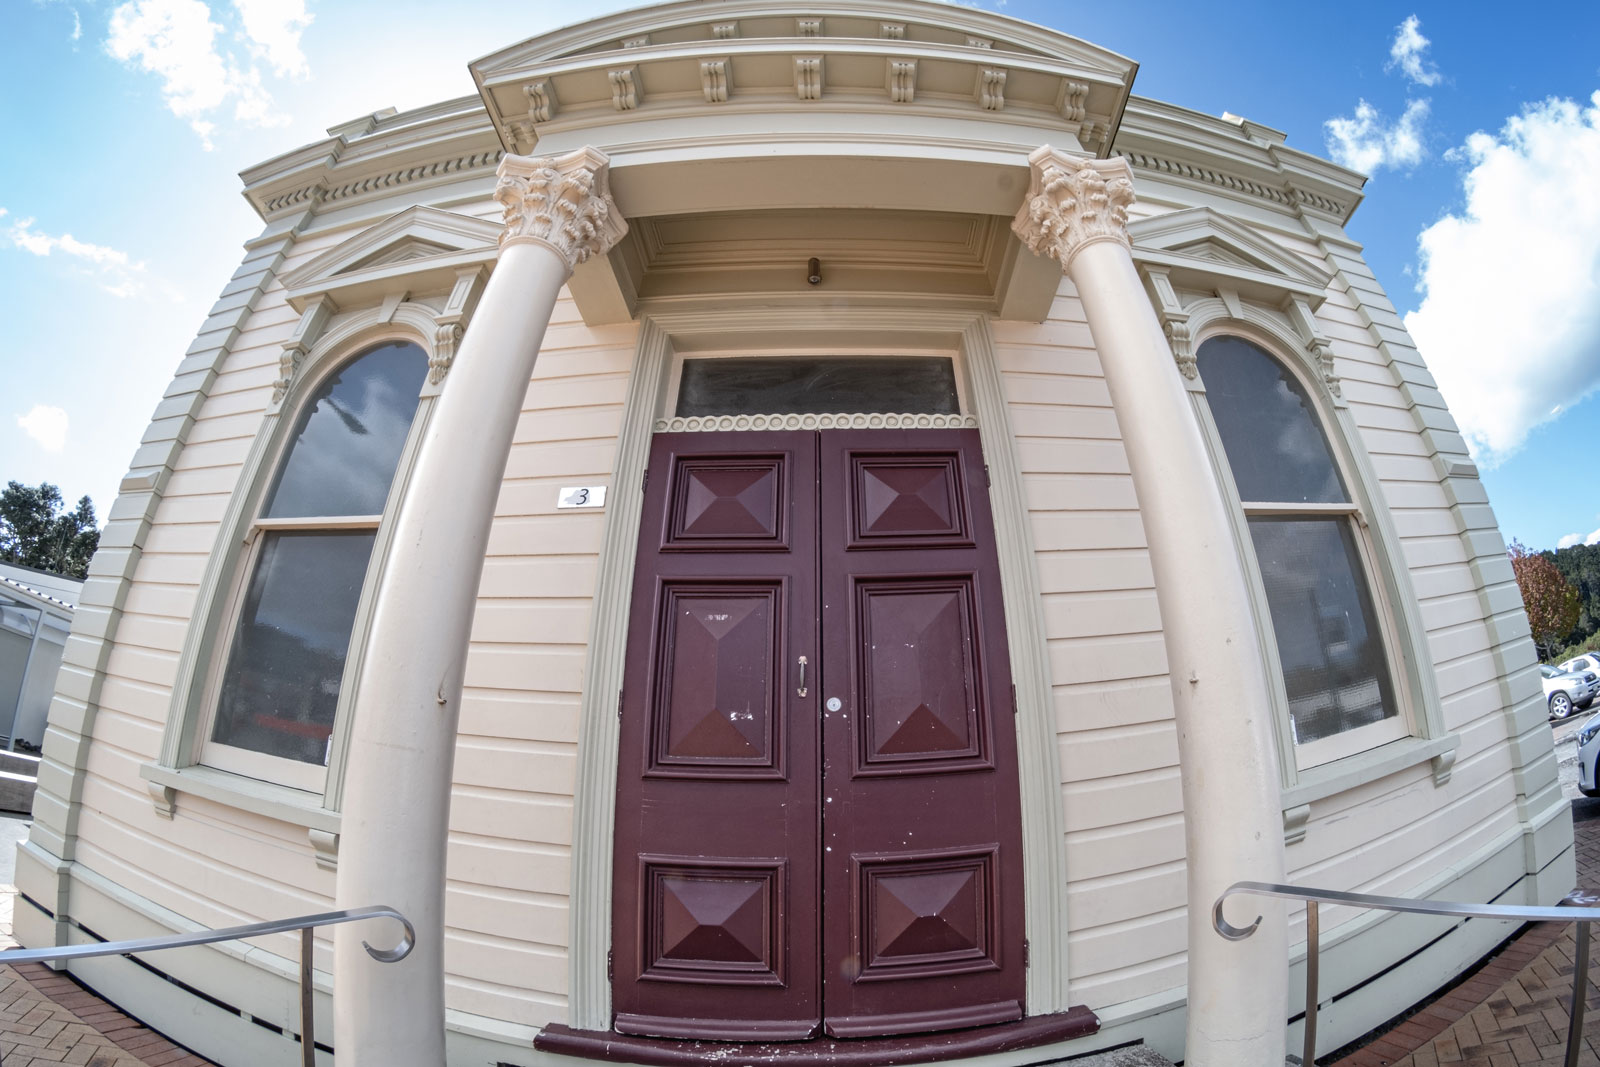 The Masonic Hall, Warkworth, North Auckland, New Zealand | Tokina SZ 8mm F2.8 E FISH-EYE | Notice that the frame was now taken yet even closer to the door. The structure's lines are totally beautifully distorted, and the door seems substantially close to the beholder despite being on the very same plane of the building's edges